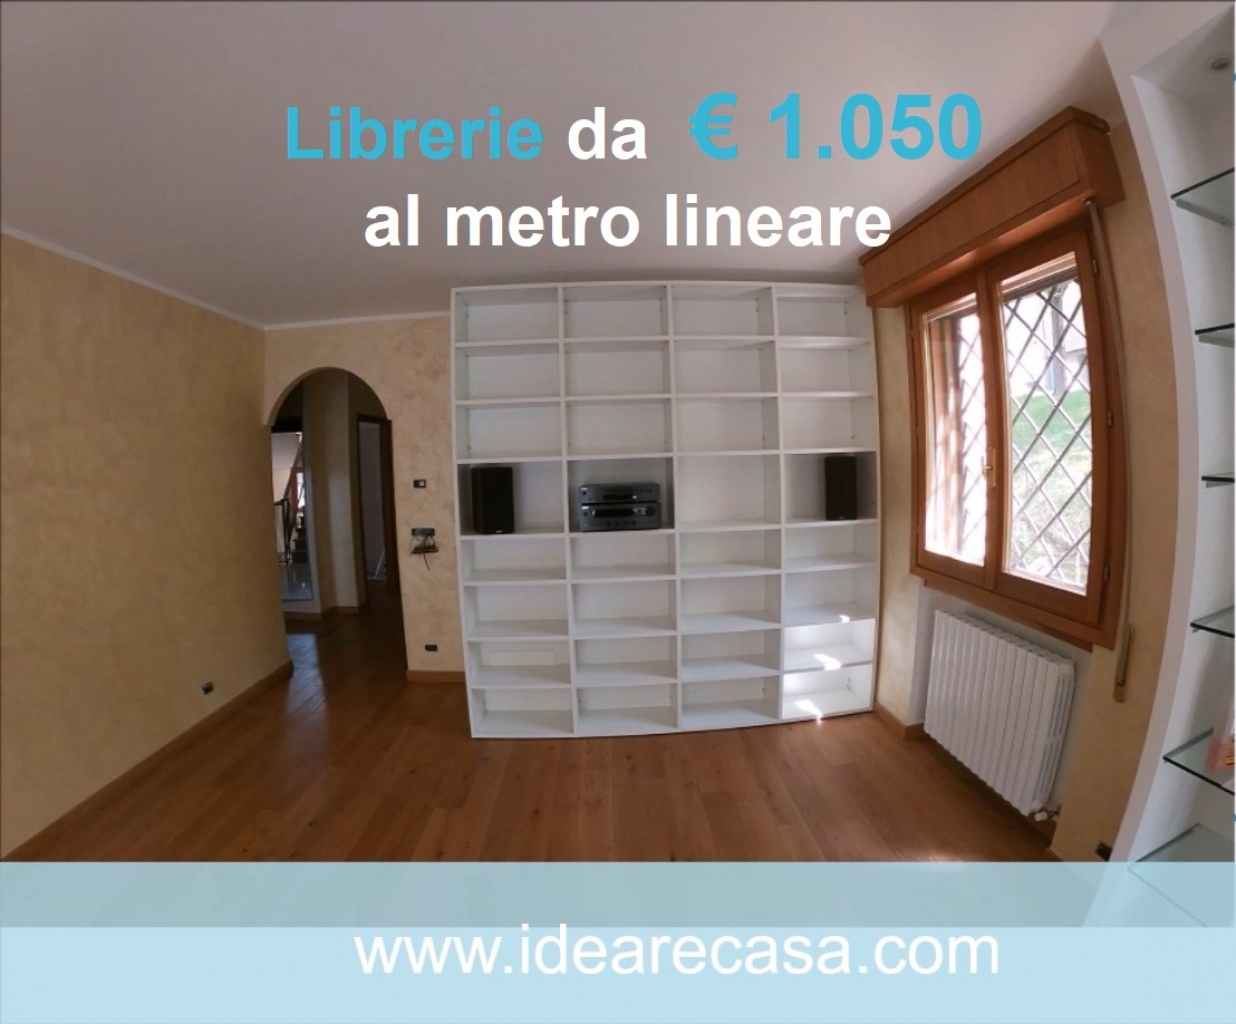 Customized bookcases from € 1,050 for meter